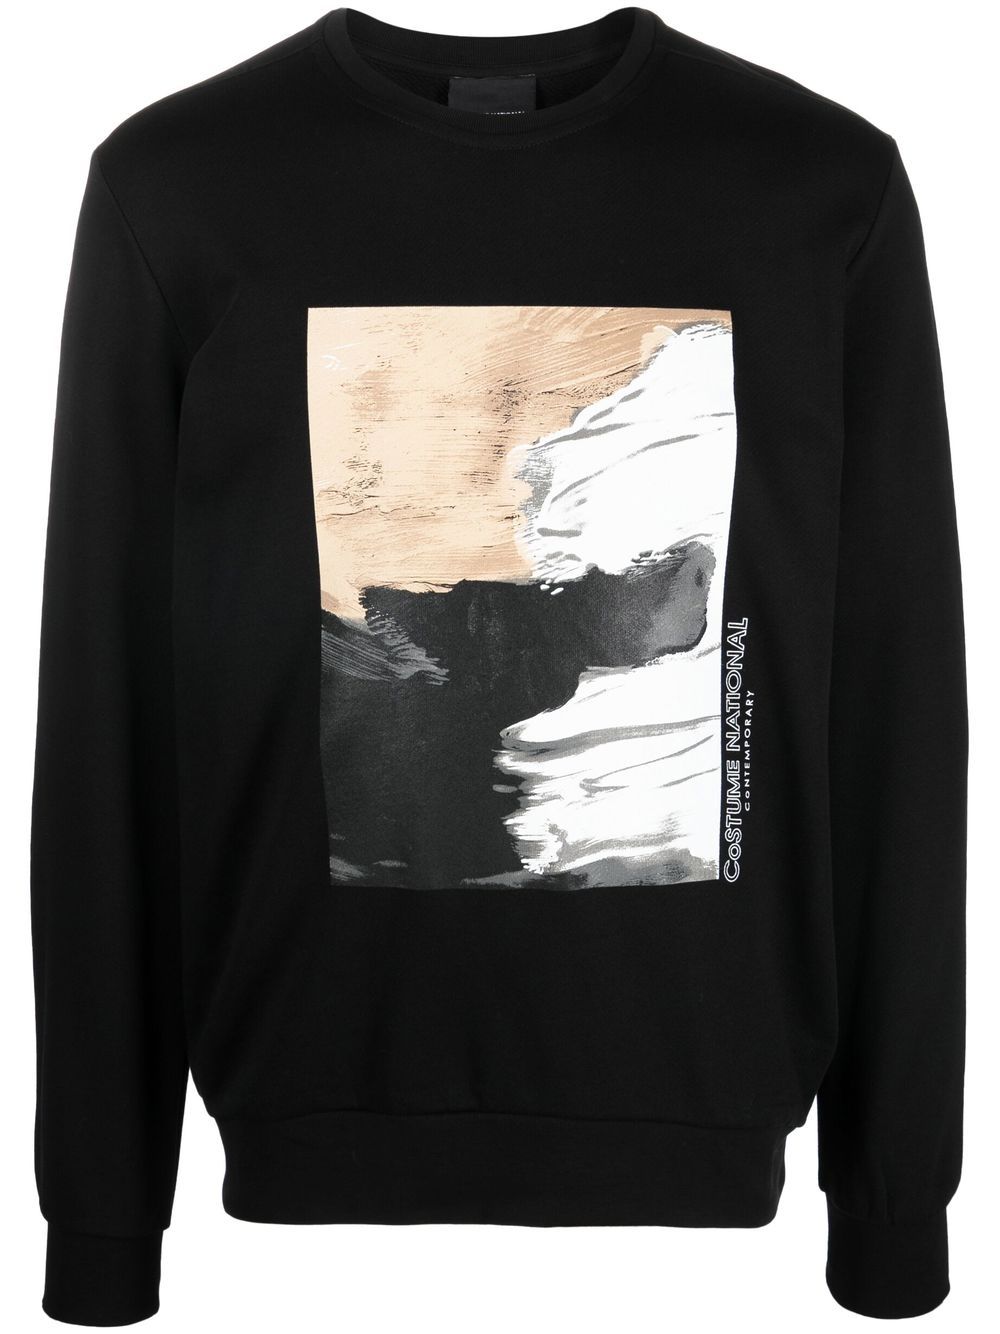 costume national contemporary graphic print cotton sweatshirt - Black von costume national contemporary